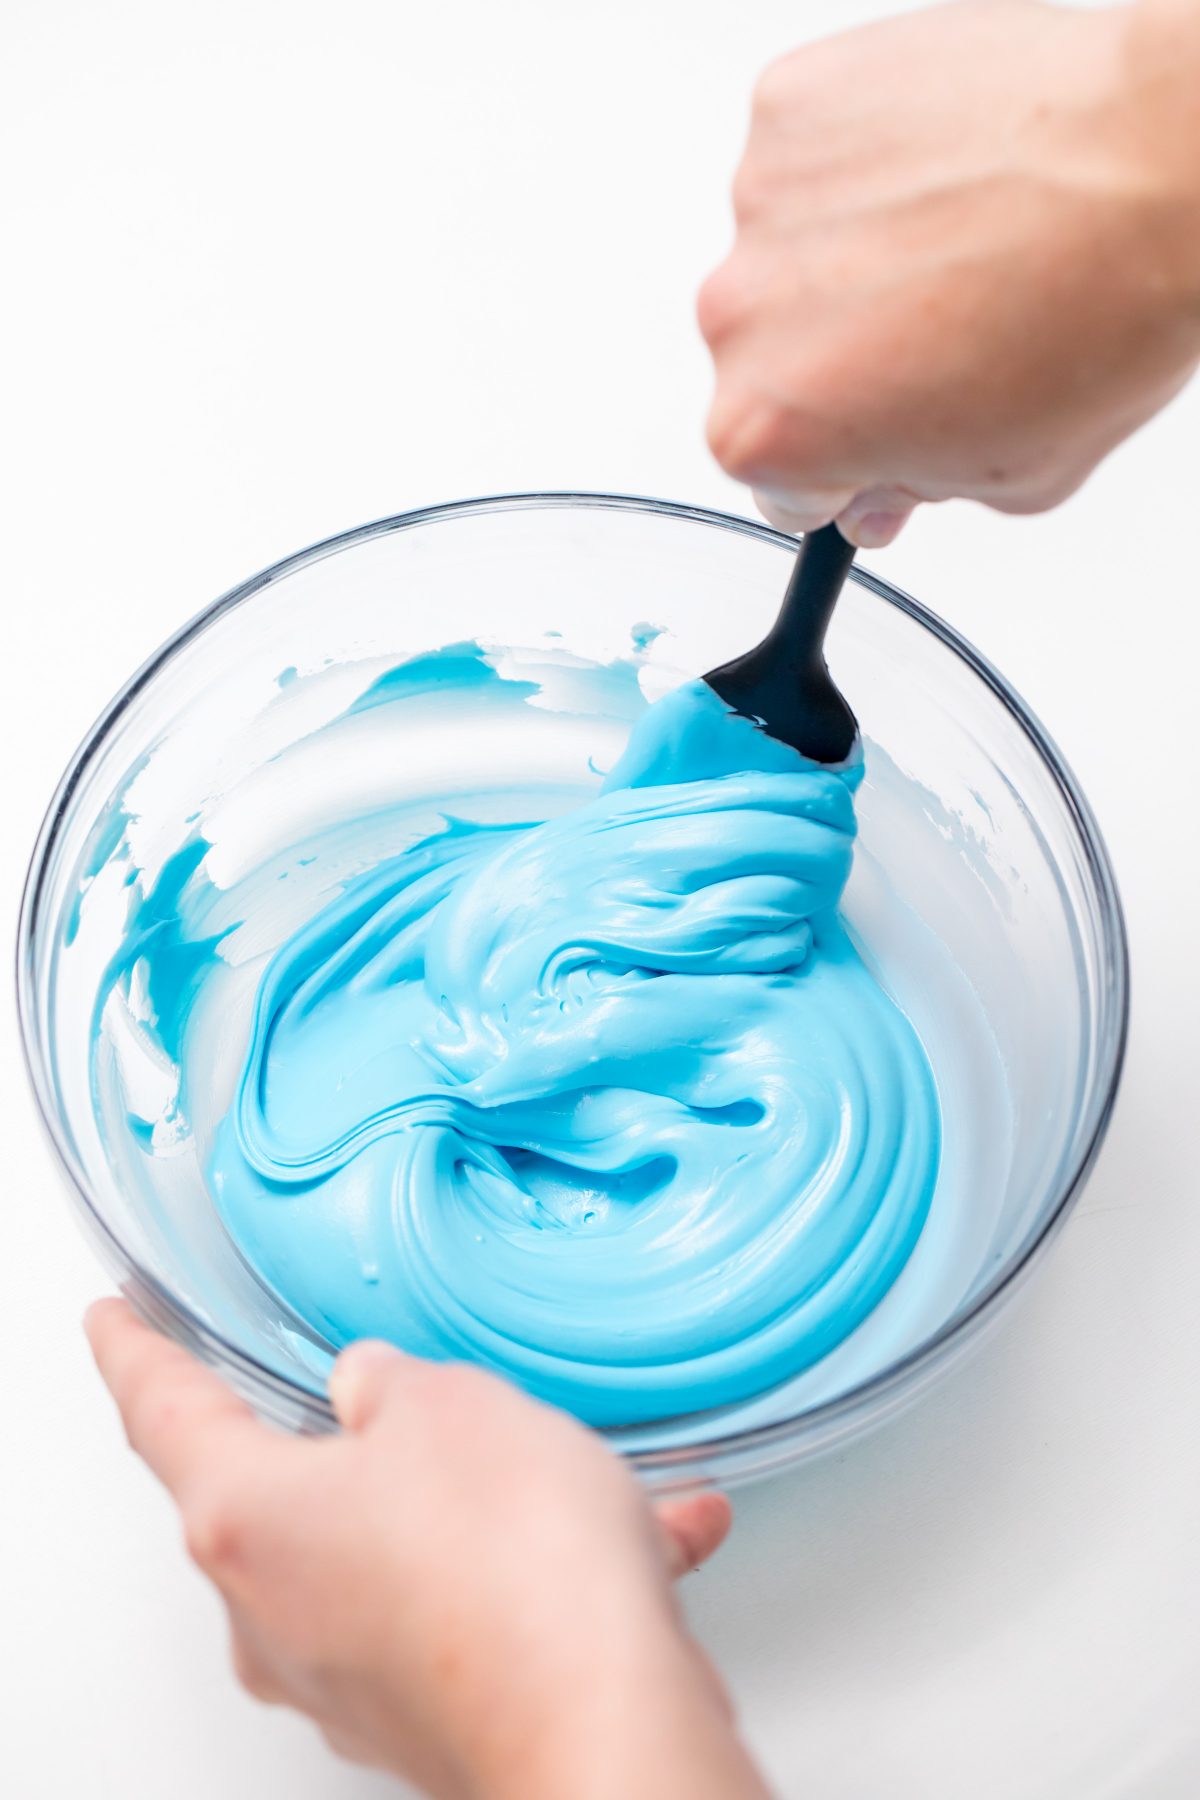 5D4B2953 - Unicorn Hot Chocolate - mixing blue food coloring with whipping cream in a mixing bowl